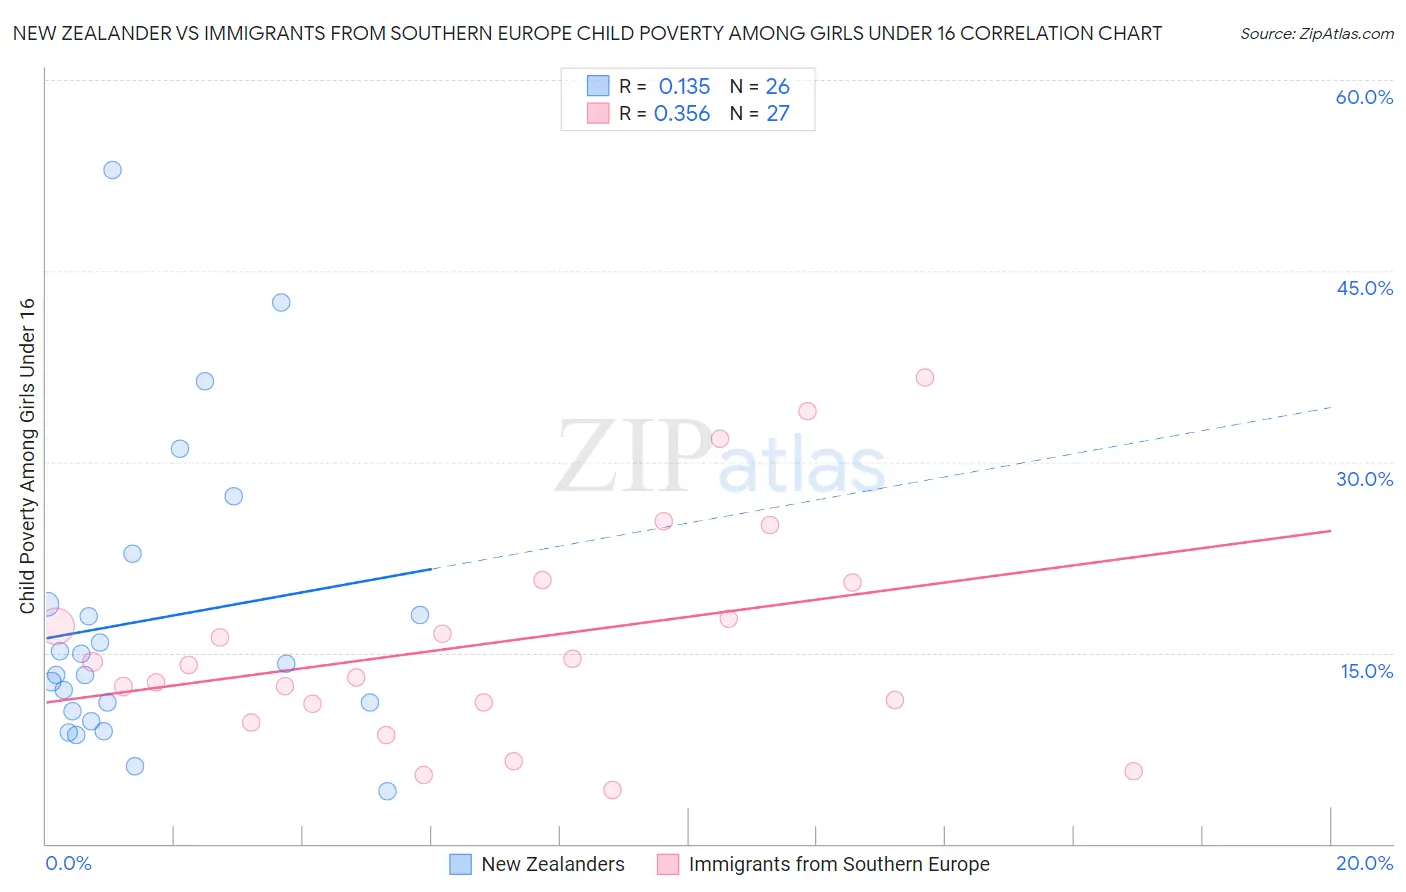 New Zealander vs Immigrants from Southern Europe Child Poverty Among Girls Under 16